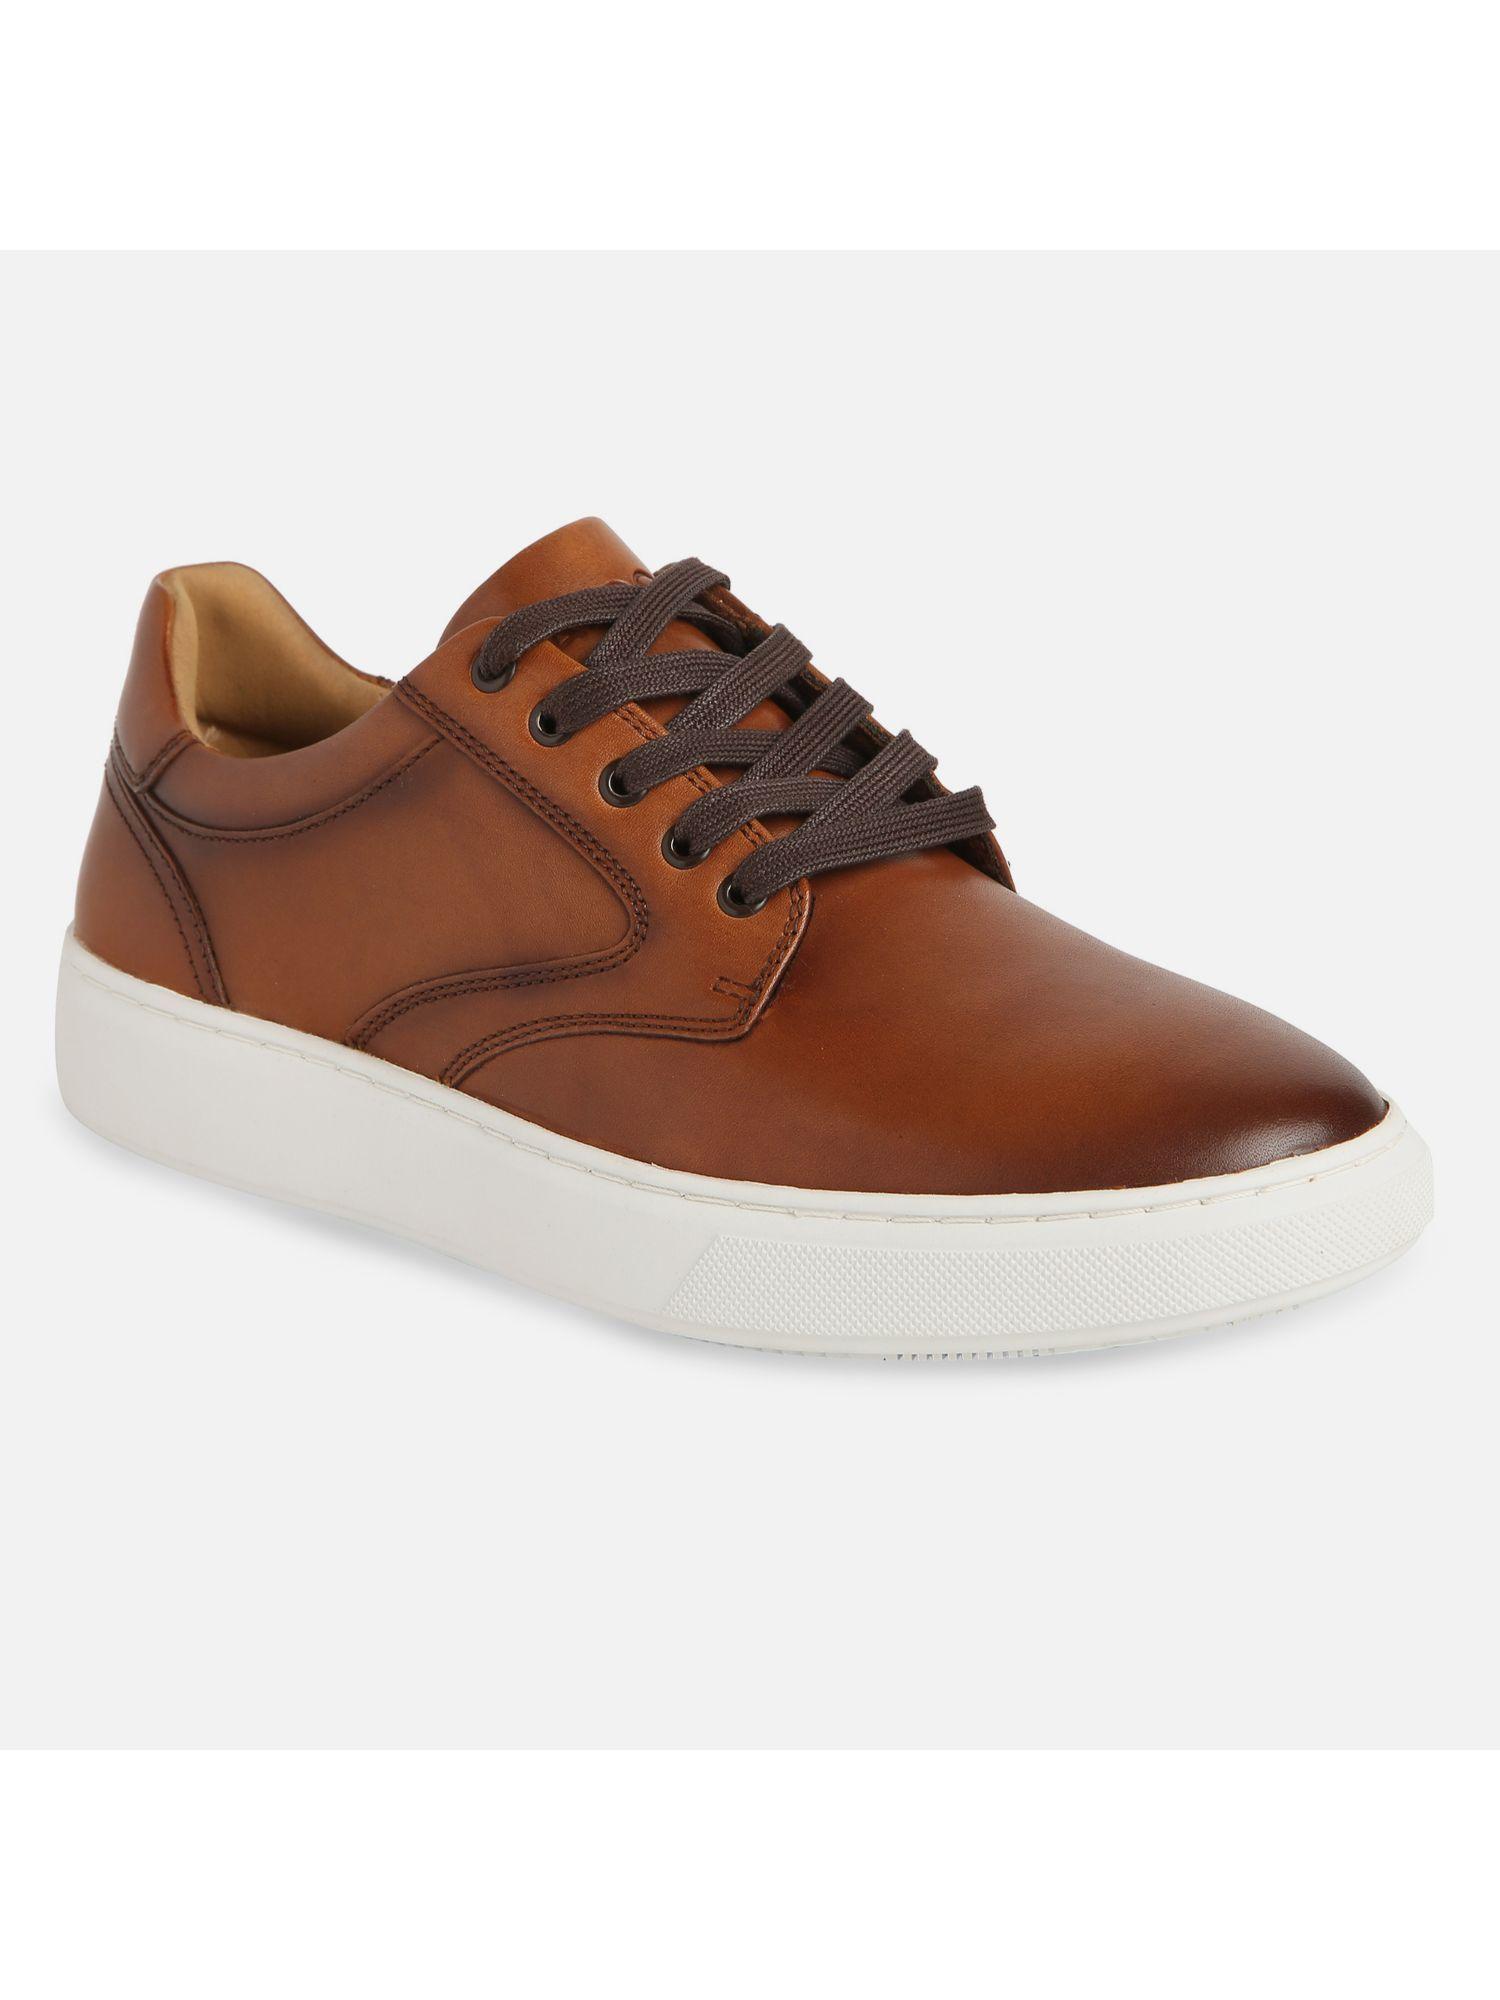 fezz-leather-tan-solid-sneakers